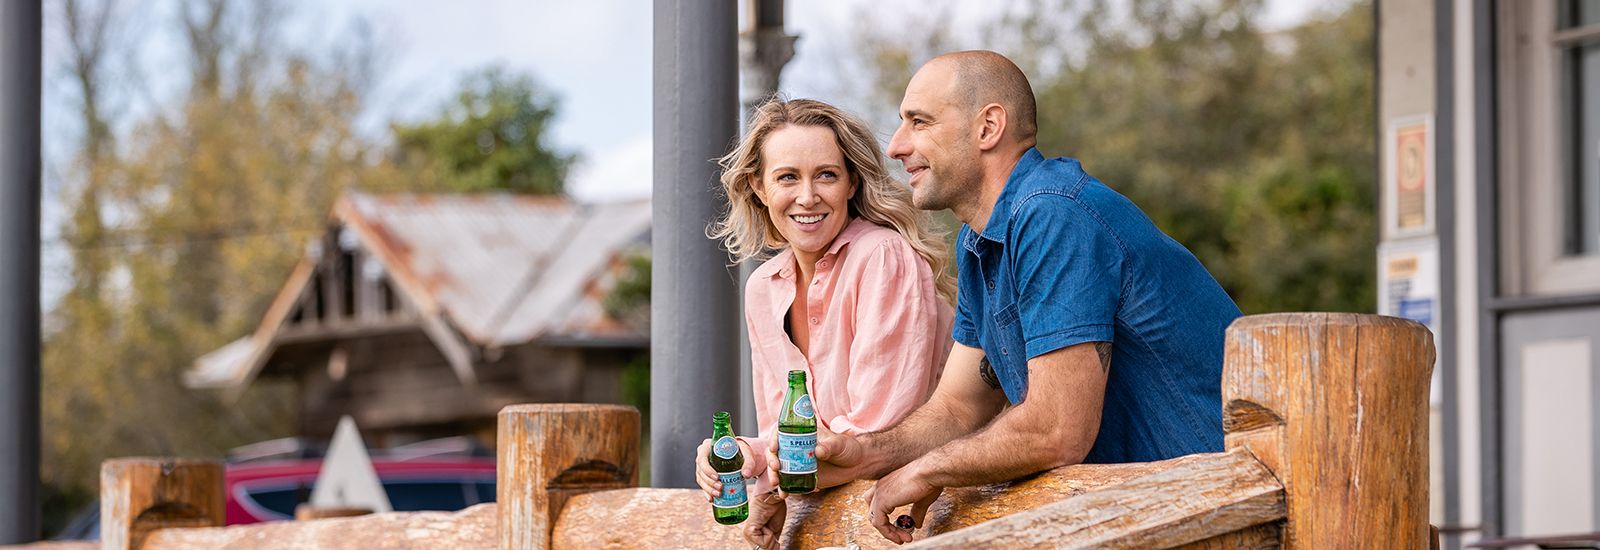 A man and a woman at a rural property having a drink banner image